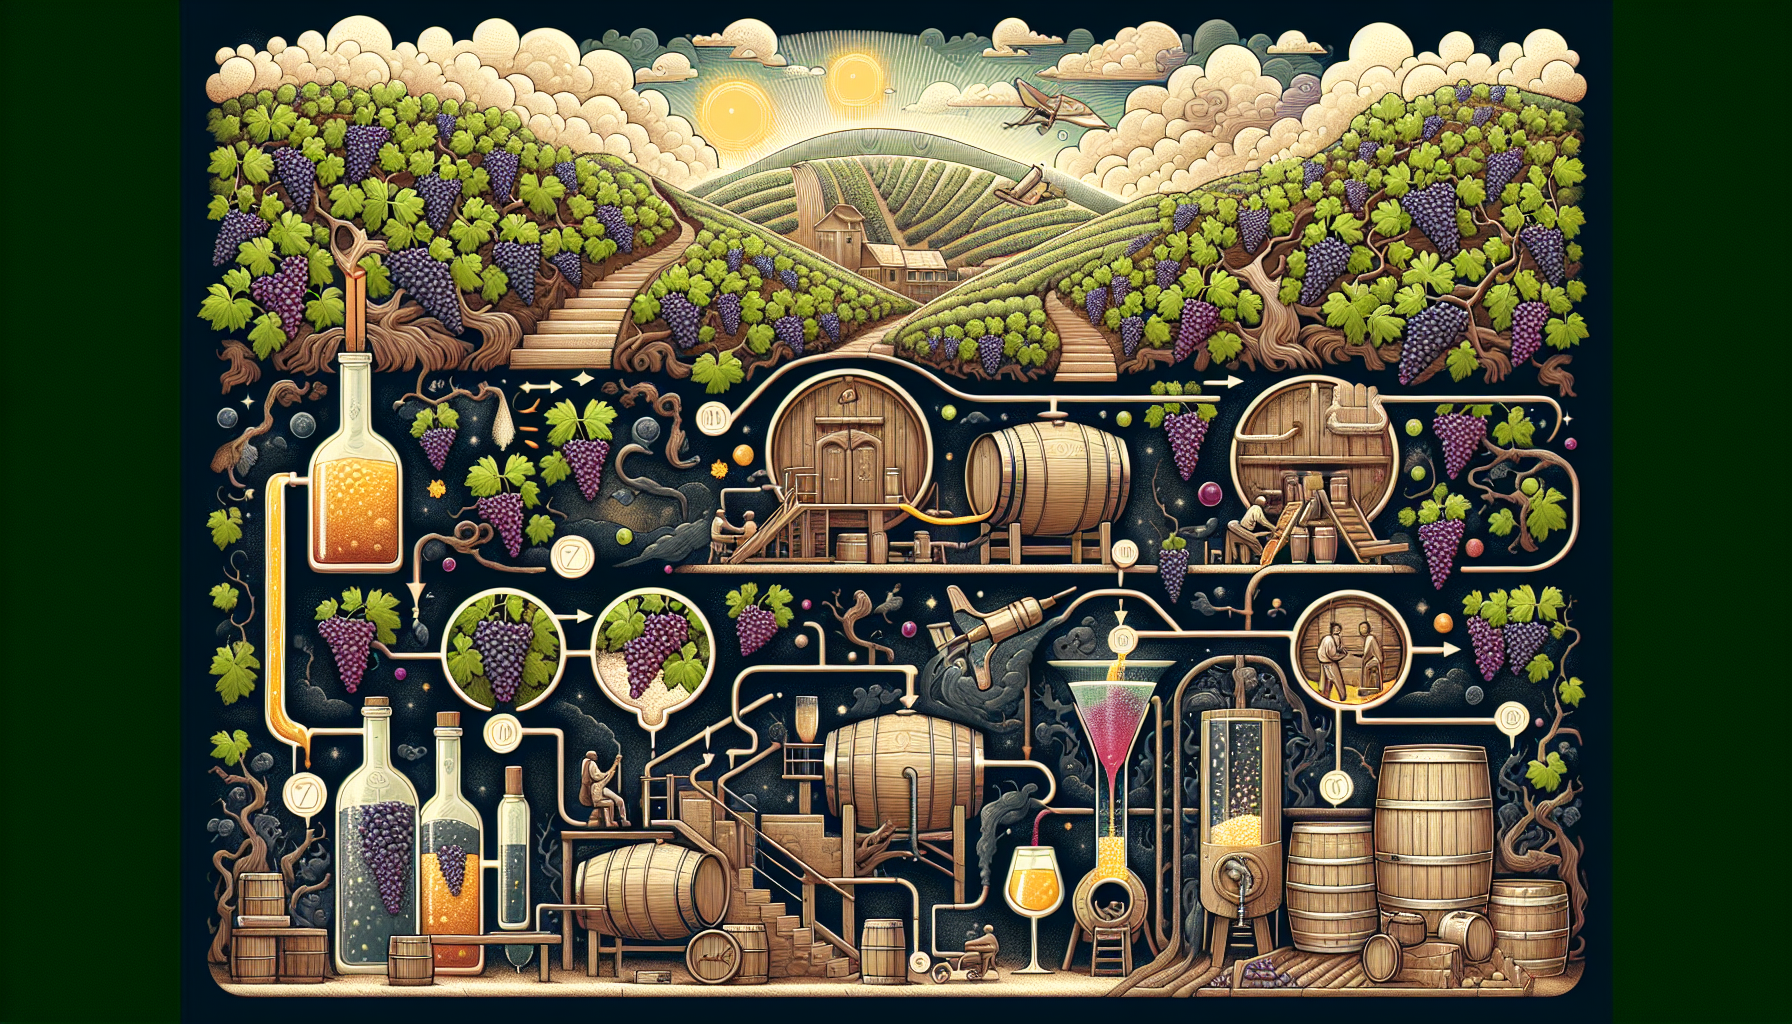 Illustration of the winemaking process from grape harvesting to bottling